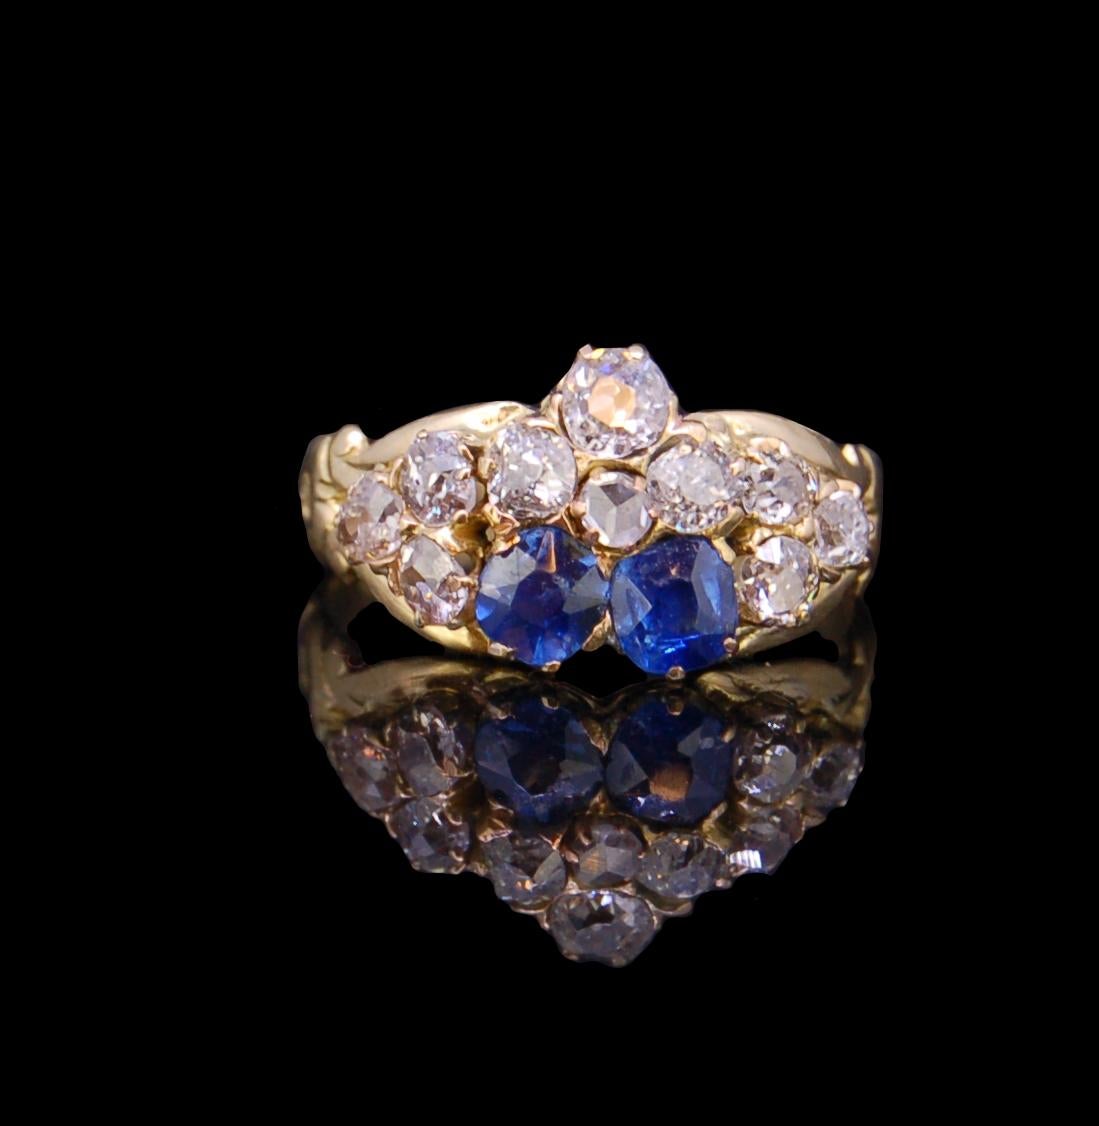 ANTIQUE SAPPHIRE AND DIAMOND RING, the center designed as a stylized viola with 2 blue sapphires and 4 diamonds, flanked on each shoulder by a cluster of 3 diamonds. The sapphires totalling approx. 0.60 ct. The diamonds totalling approx. 1 ct. Size